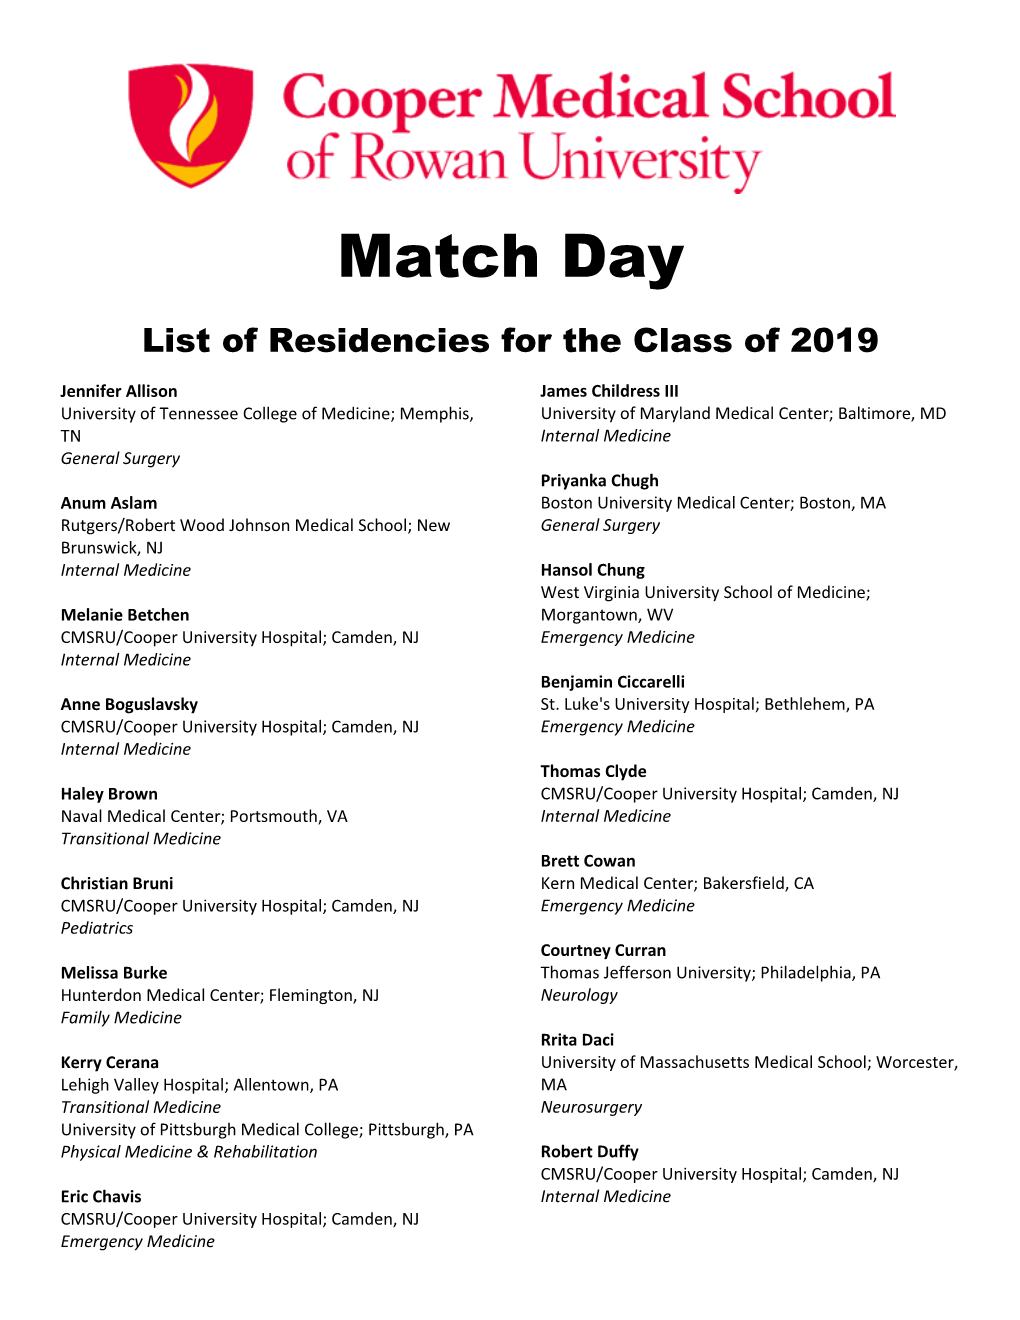 View Class of 2019 Residencies